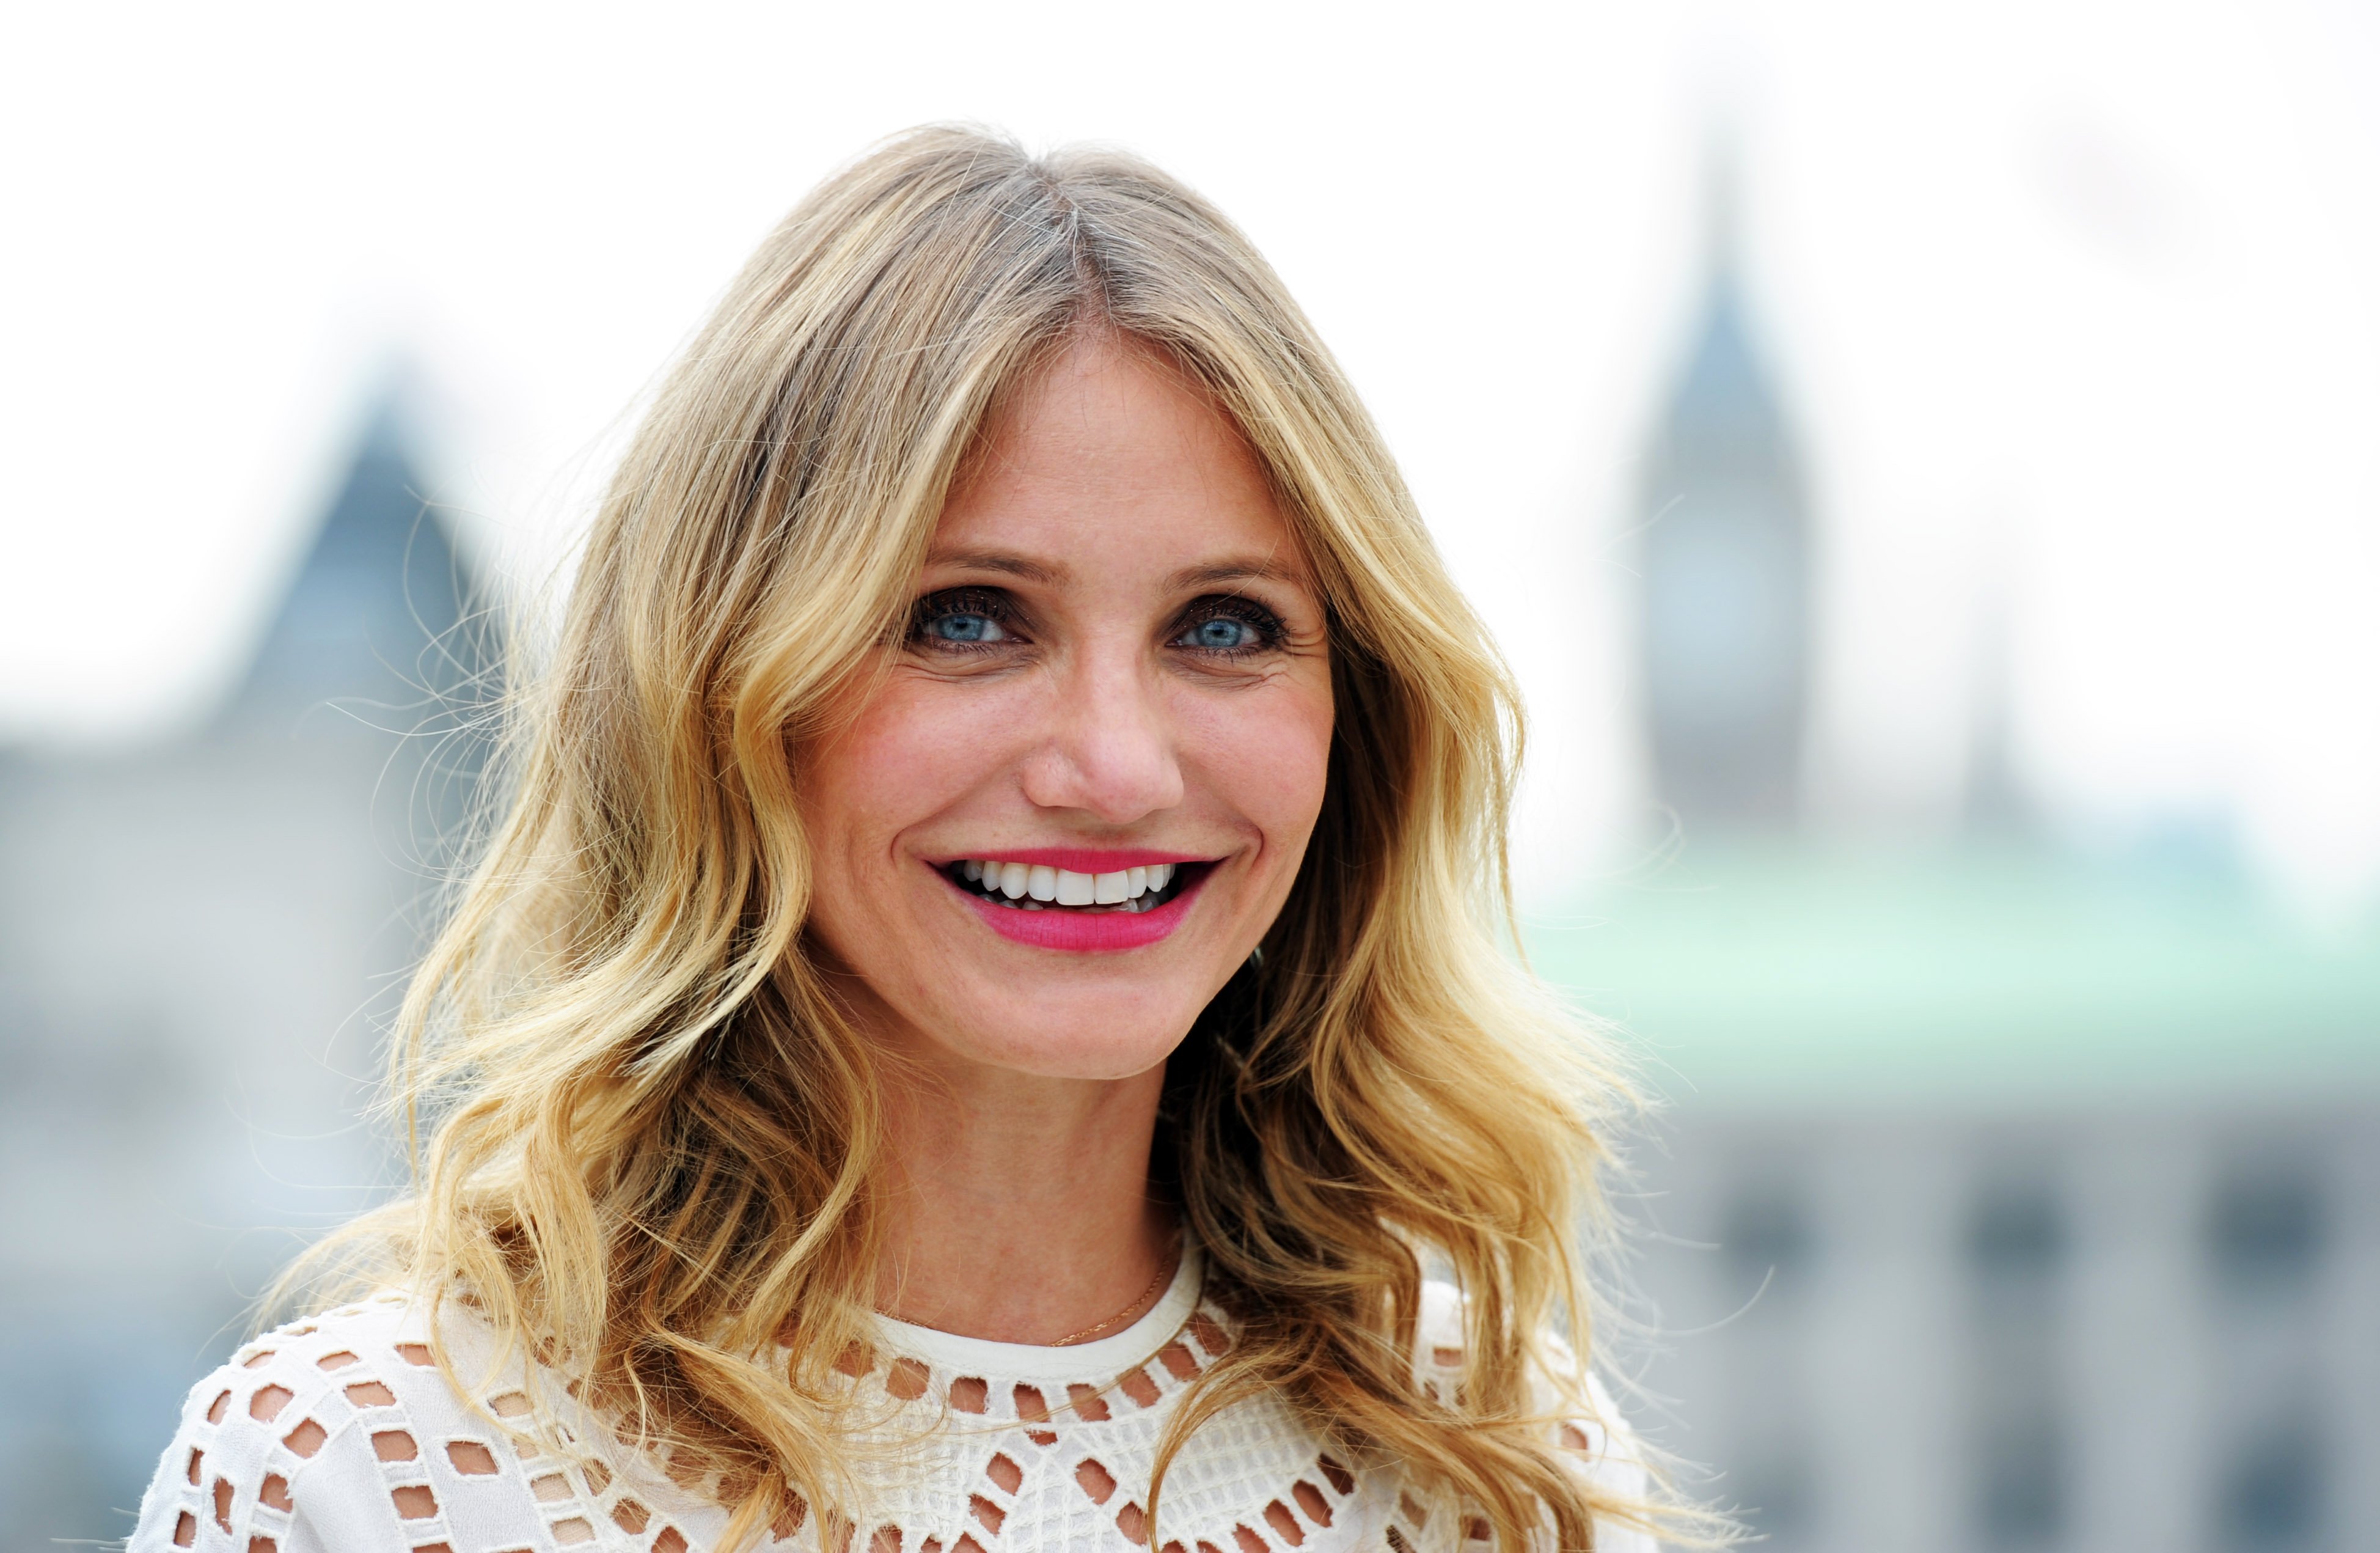 Cameron Diaz during a 2014 photocall in London. | Photo: Getty Images